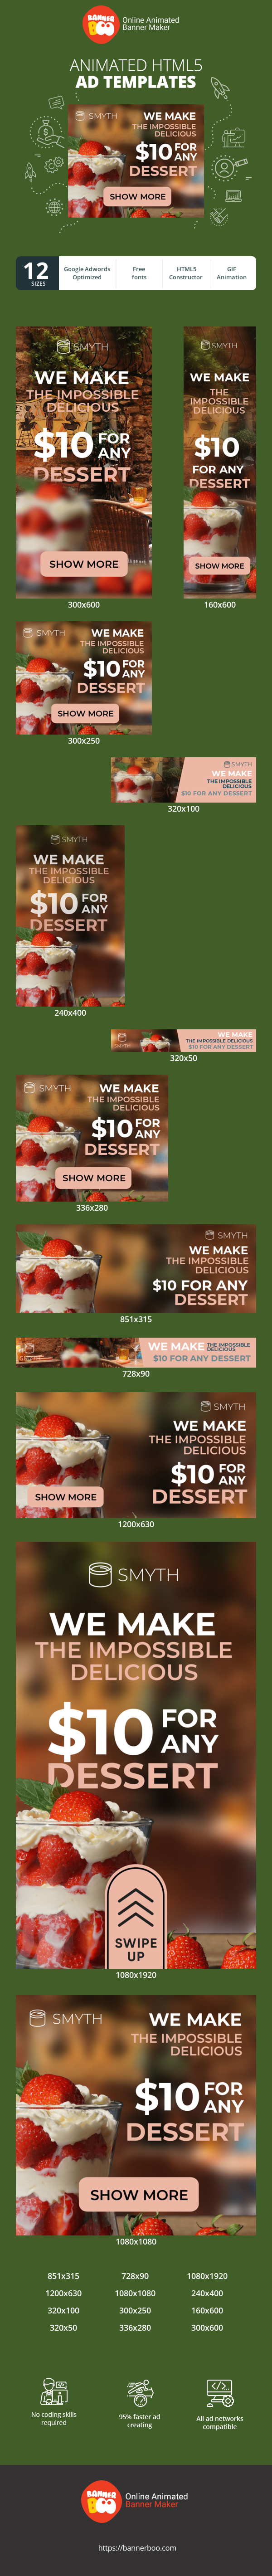 Banner ad template — We Make The Impossible Delicious — $10 For Any Dessert